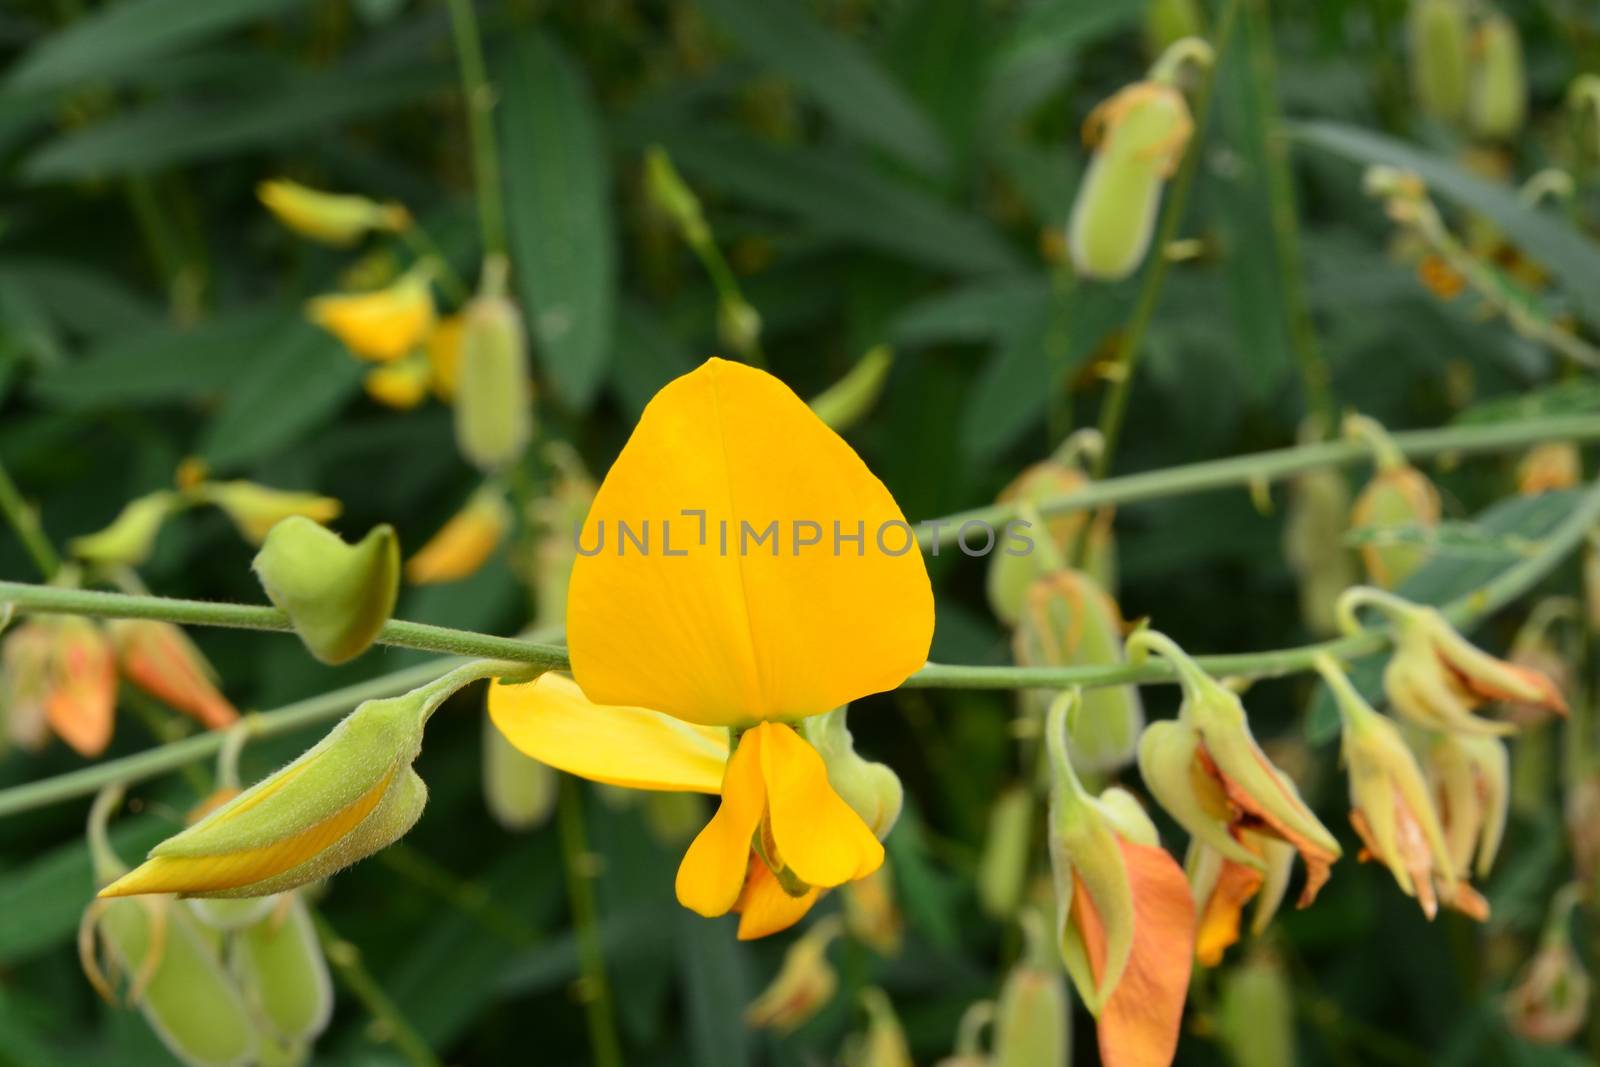 Close up Blooming yellow Sunn hemp flowers or Crotalaria juncea is a tropical Asian plant used for green manure forage, organic soil building and cover crop applications